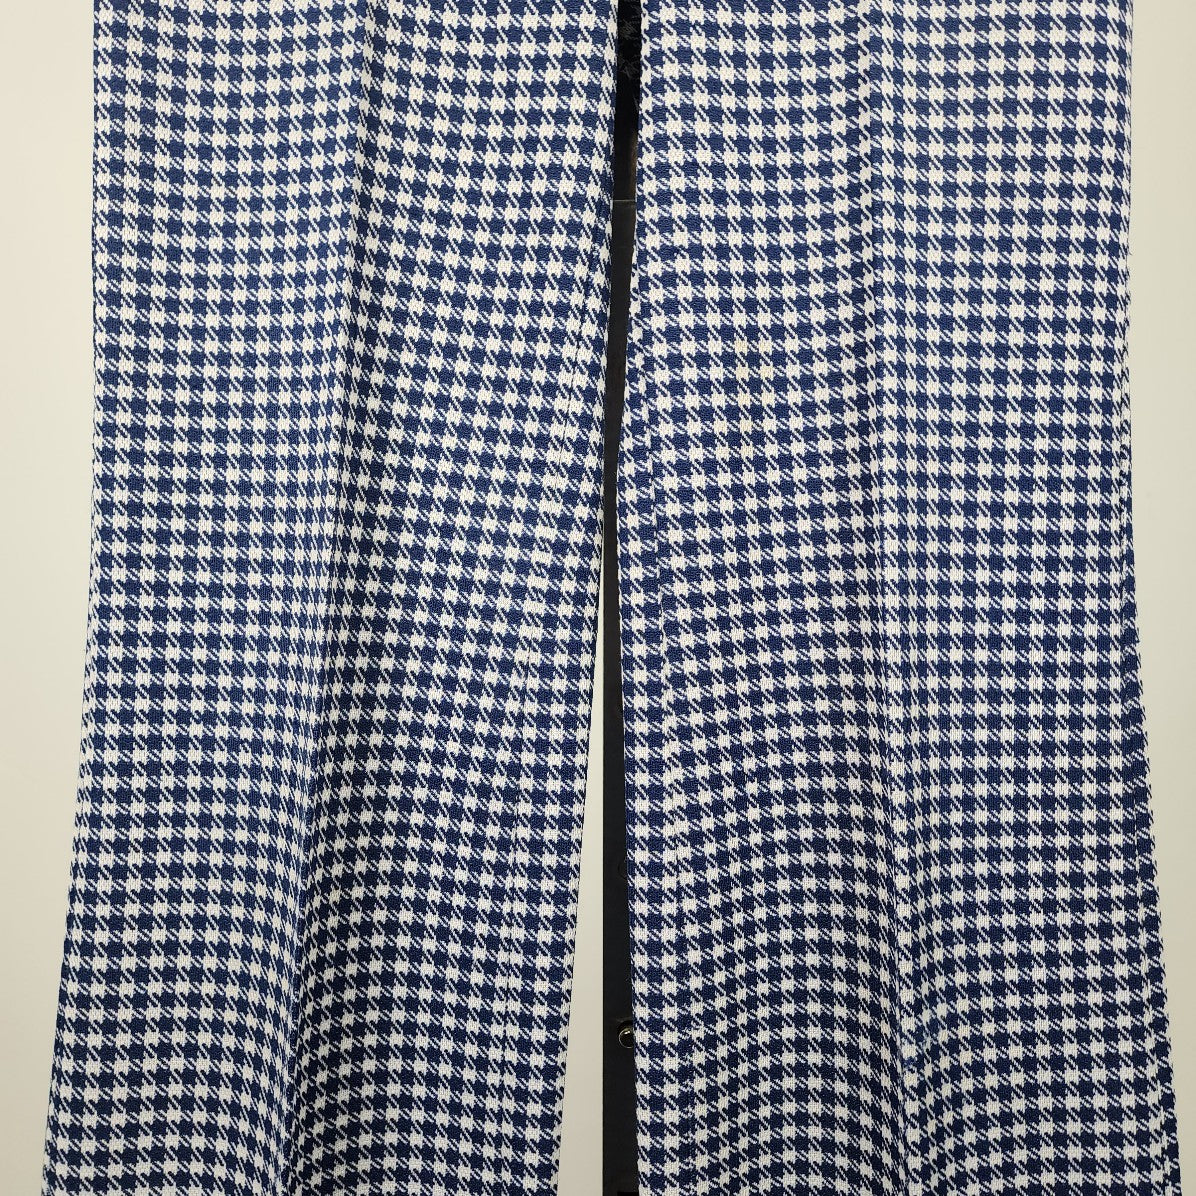 Vintage Navy Blue Plaid Check Bell Bottom Pants Size S/M